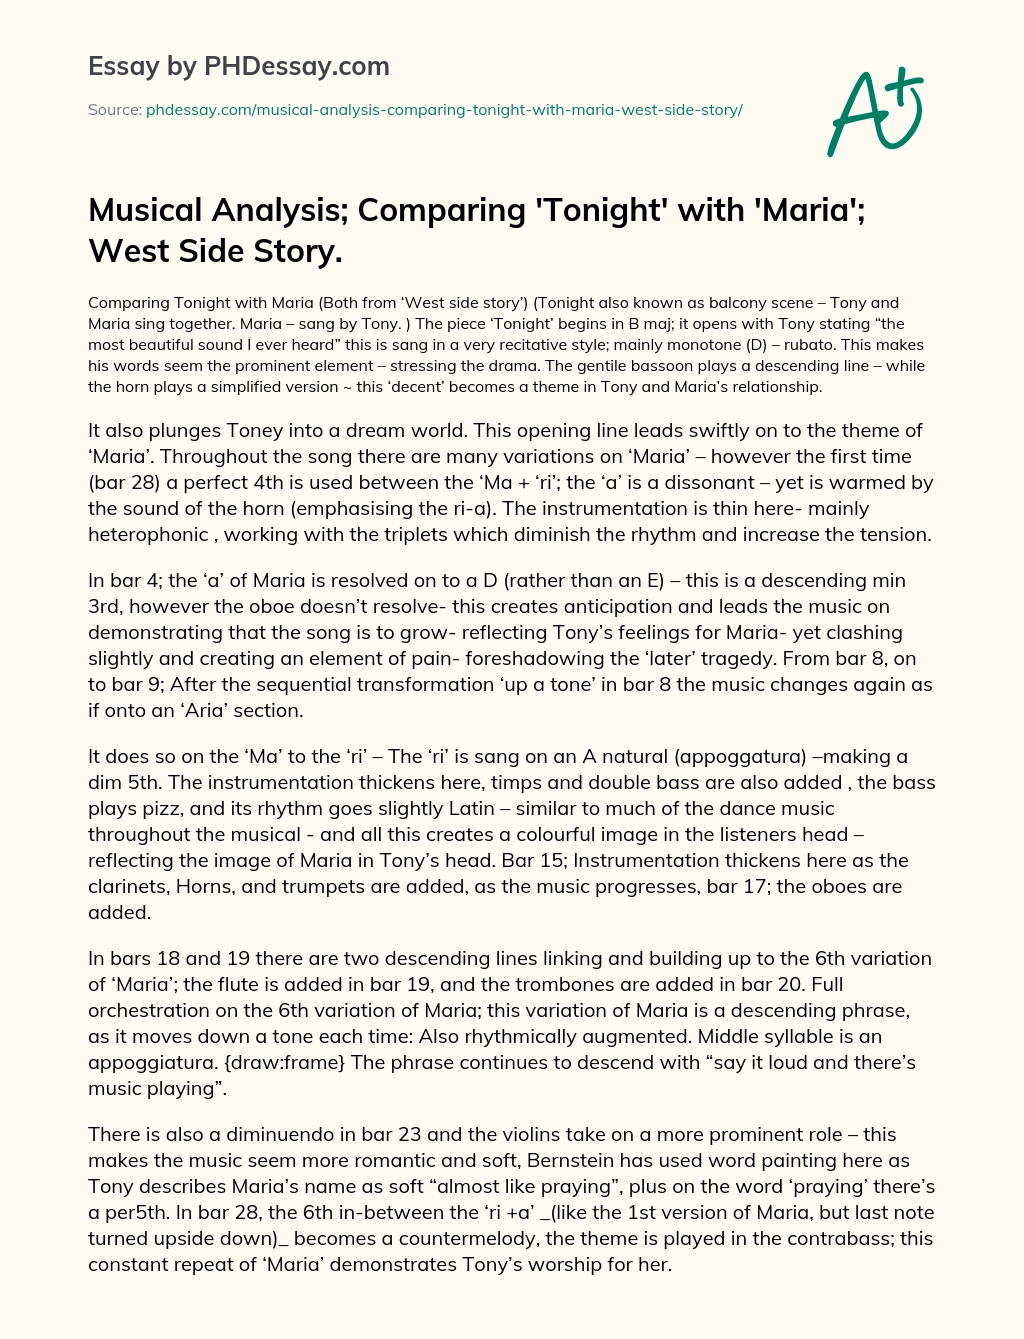 Musical Analysis; Comparing ‘Tonight’ with ‘Maria’; West Side Story. essay